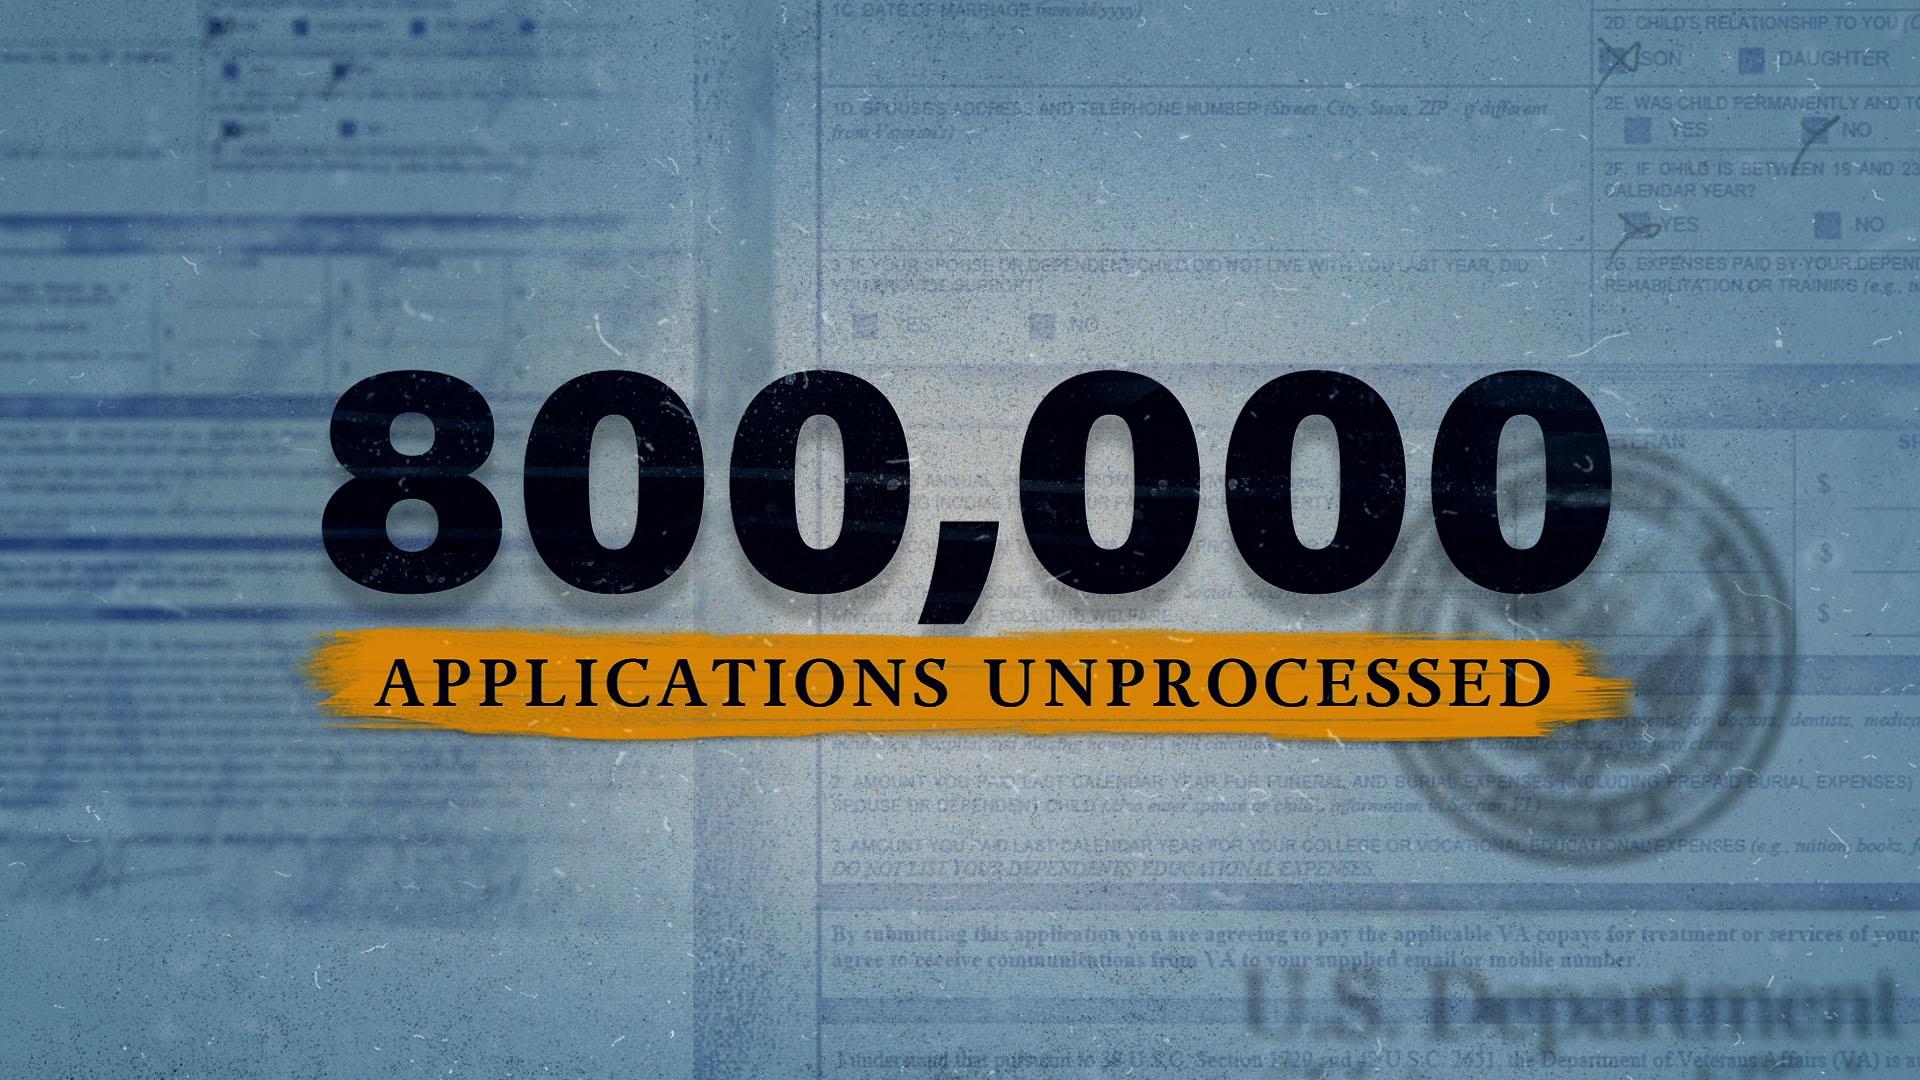 As of 2015, over 800,000 applications for VA healthcare lingered unprocessed.